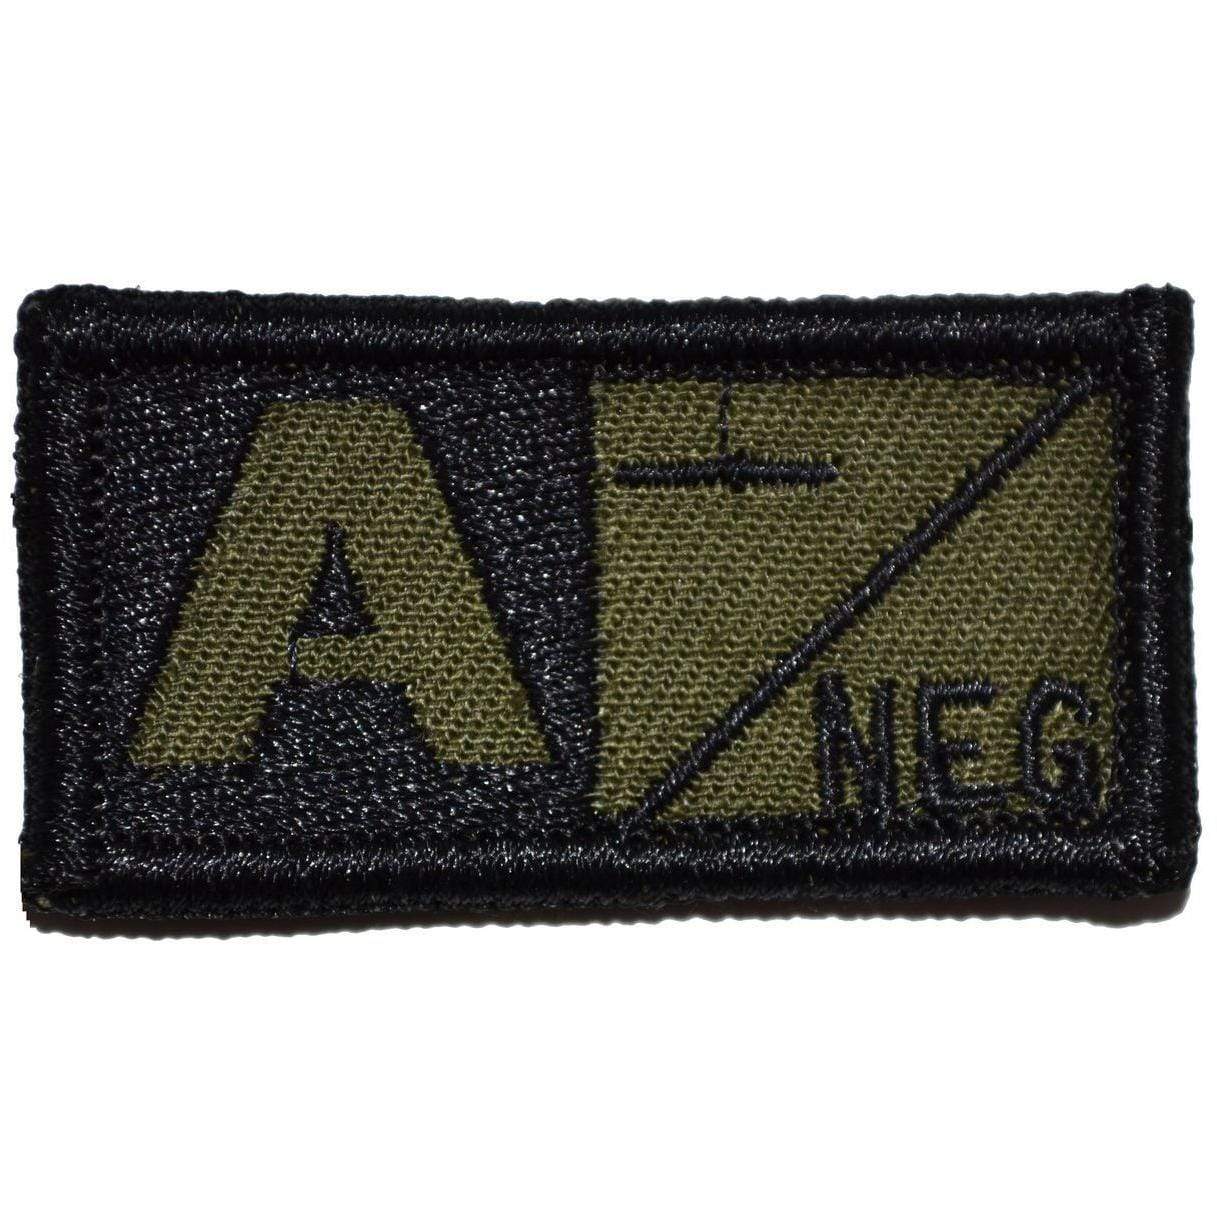 Tactical Gear Junkie Patches Olive Drab Blood Type - 1x2 Patch